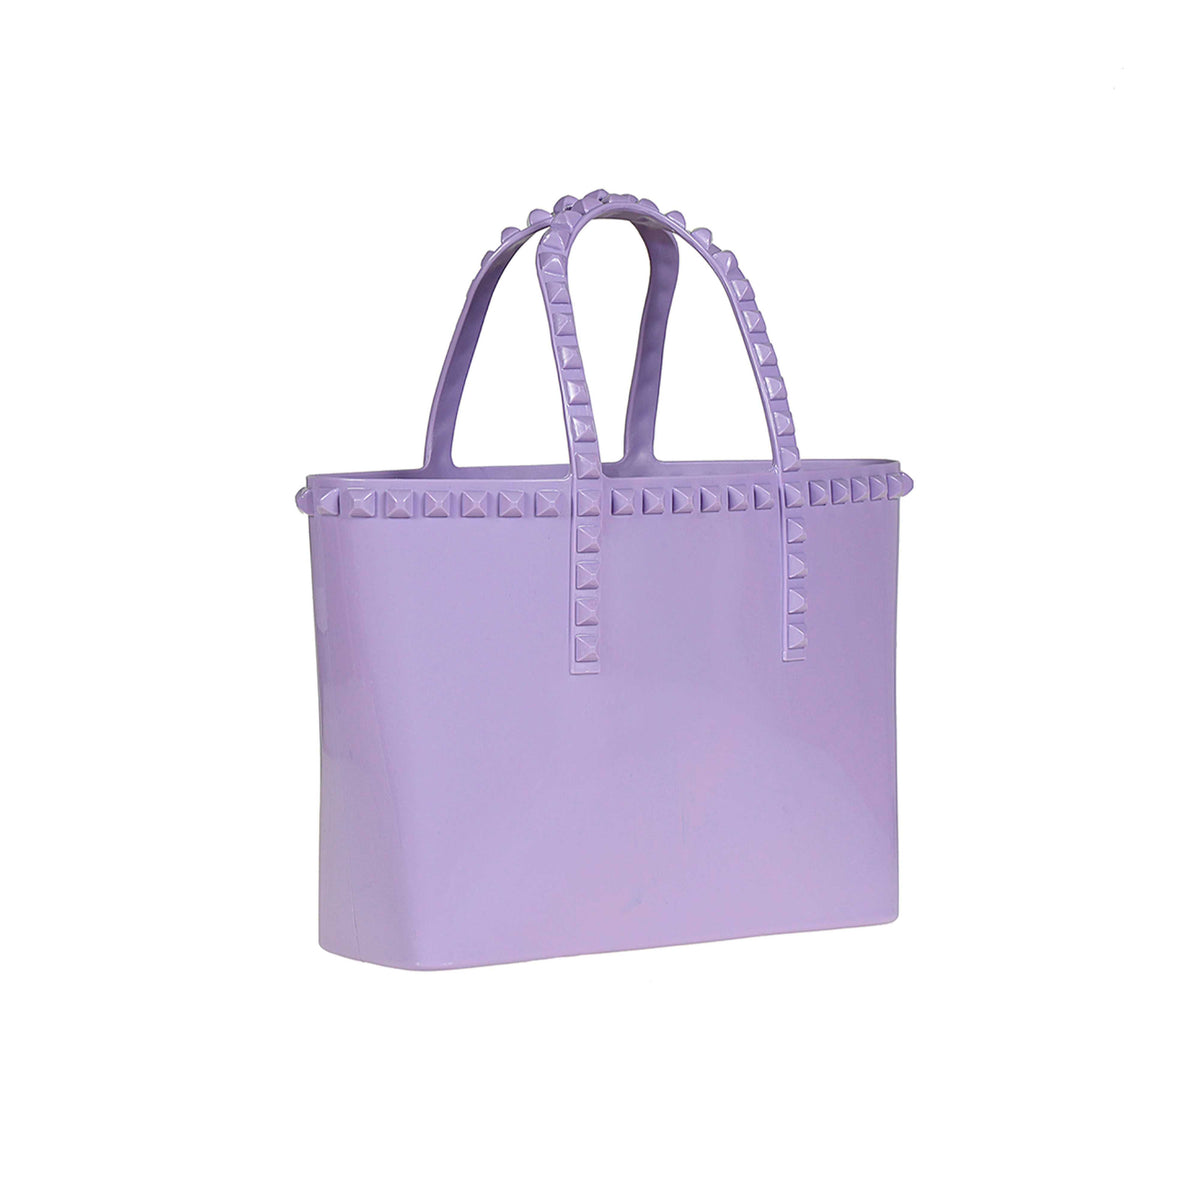 Violet jelly beach tote bags from Carmen Sol